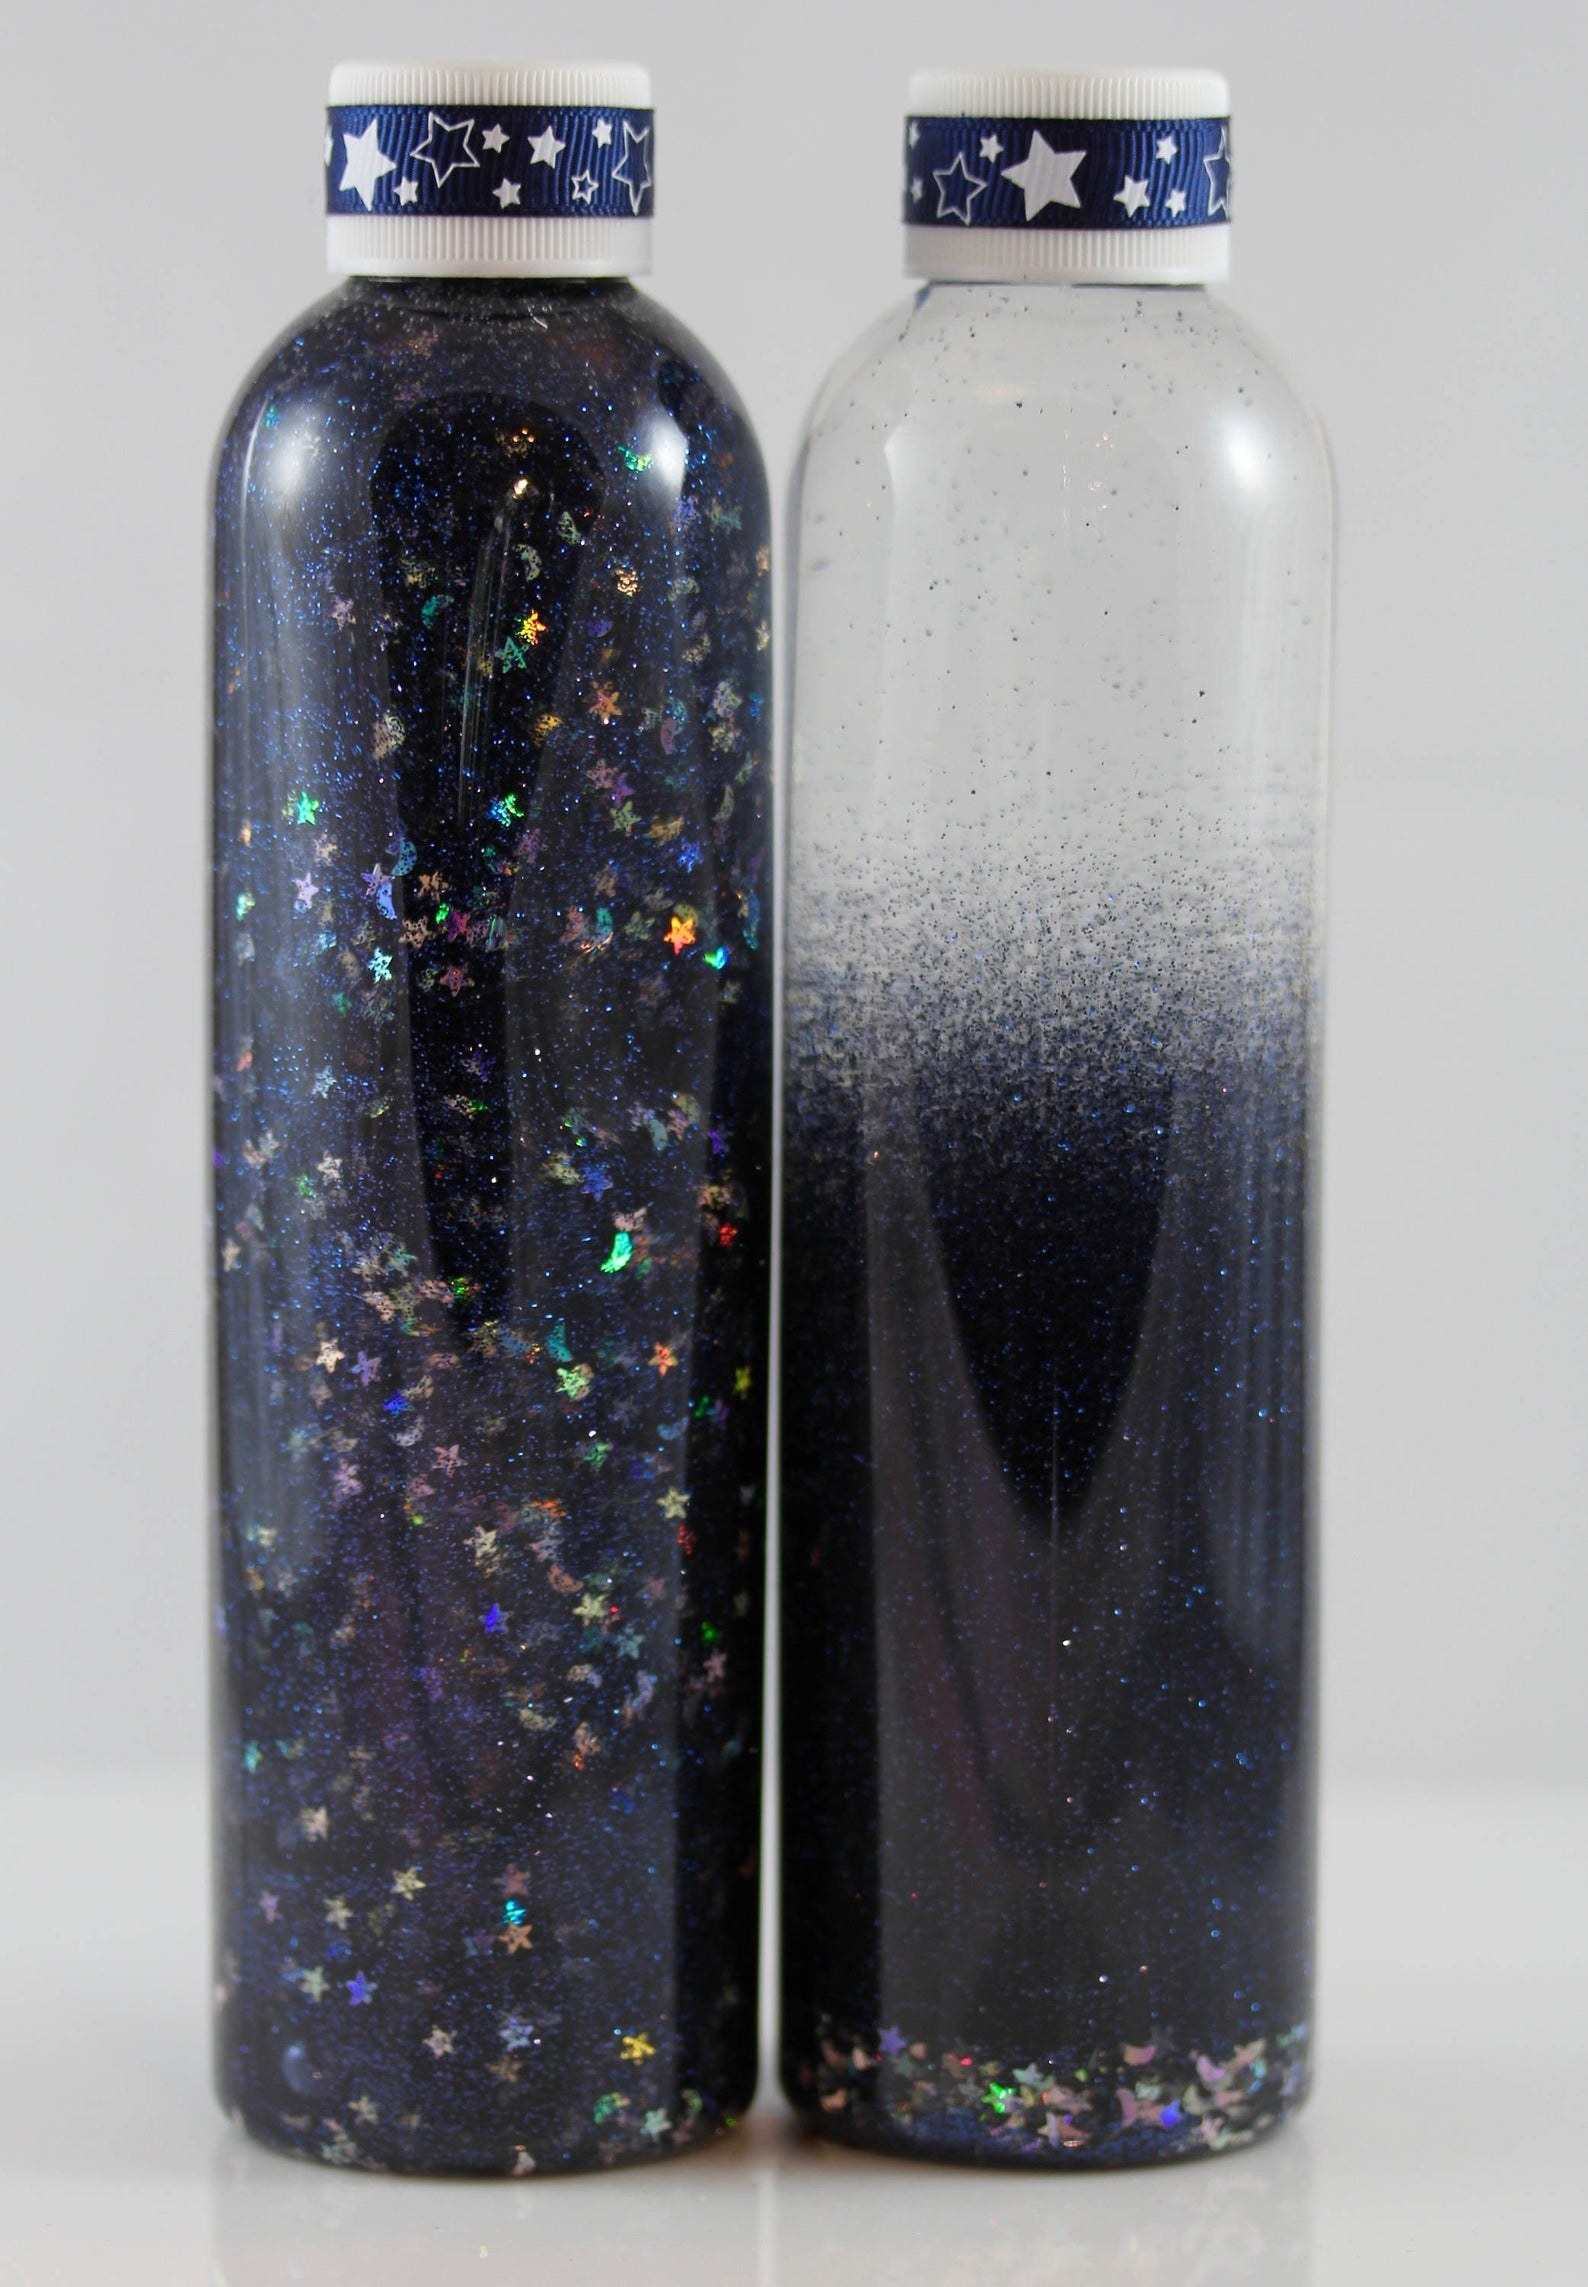 A water bottle full of black glass beads and glitter stars that fall to the bottom